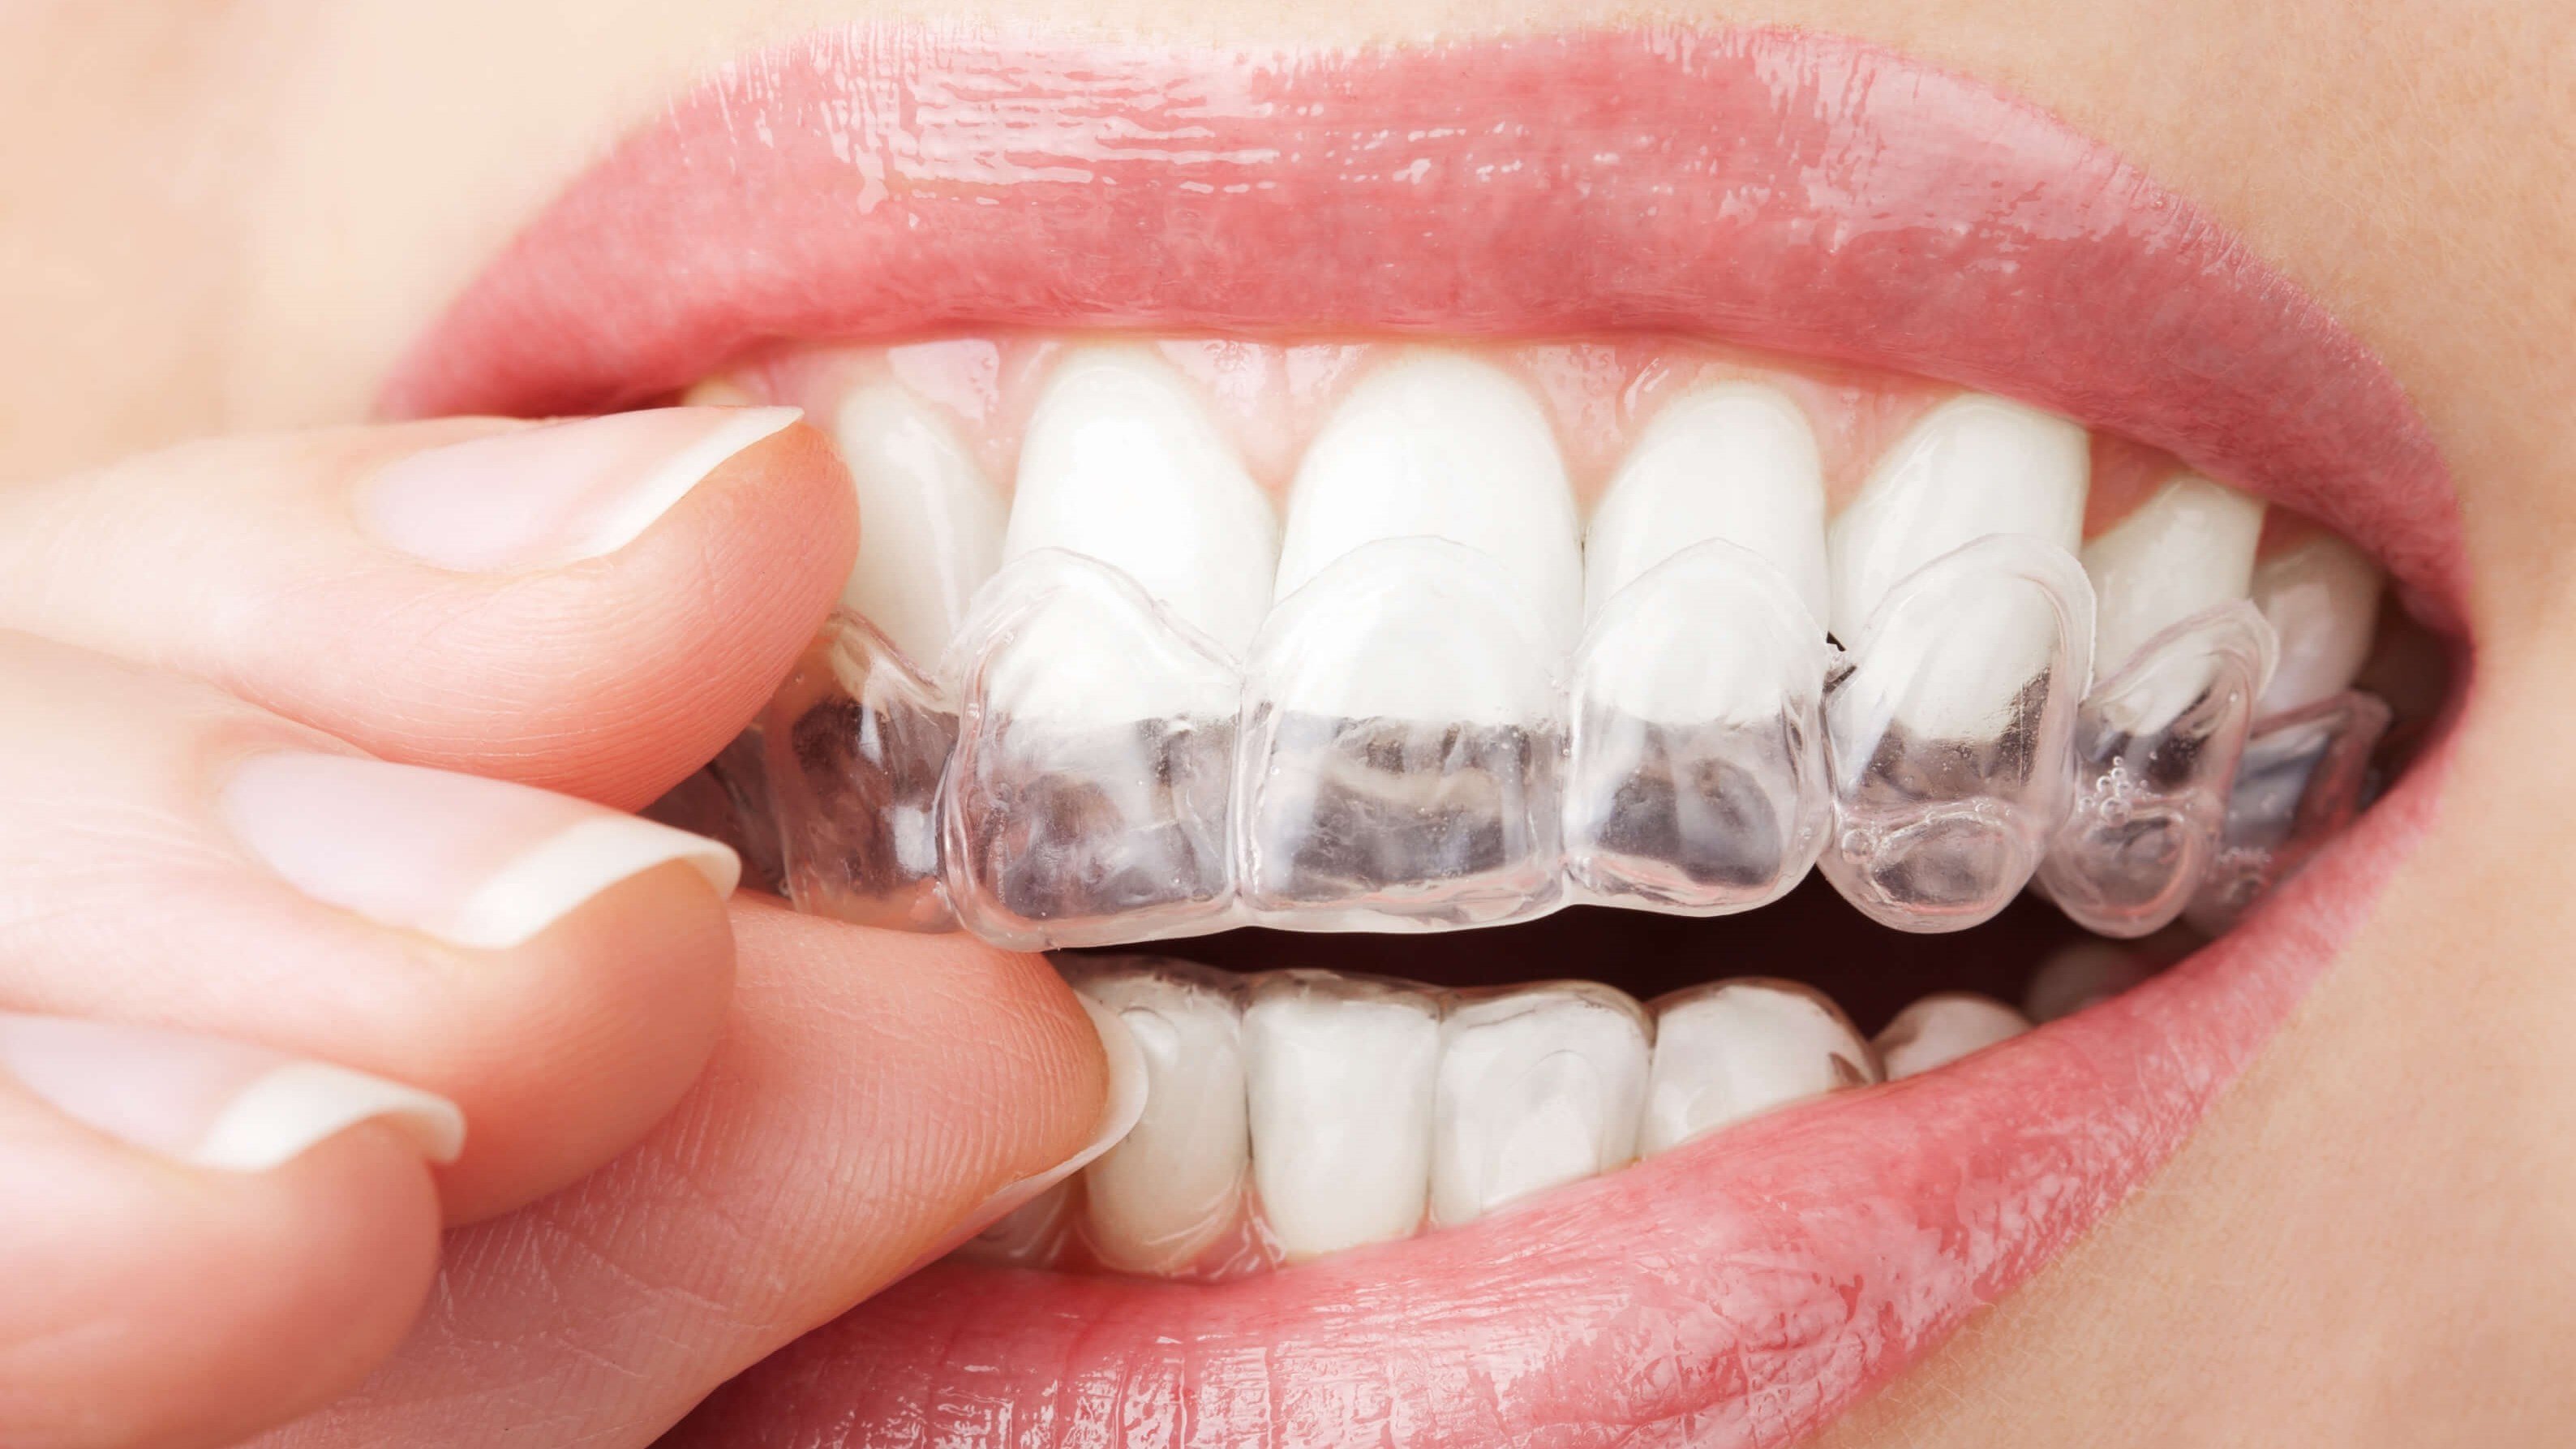 Is Invisalign Treatment Right For Me?